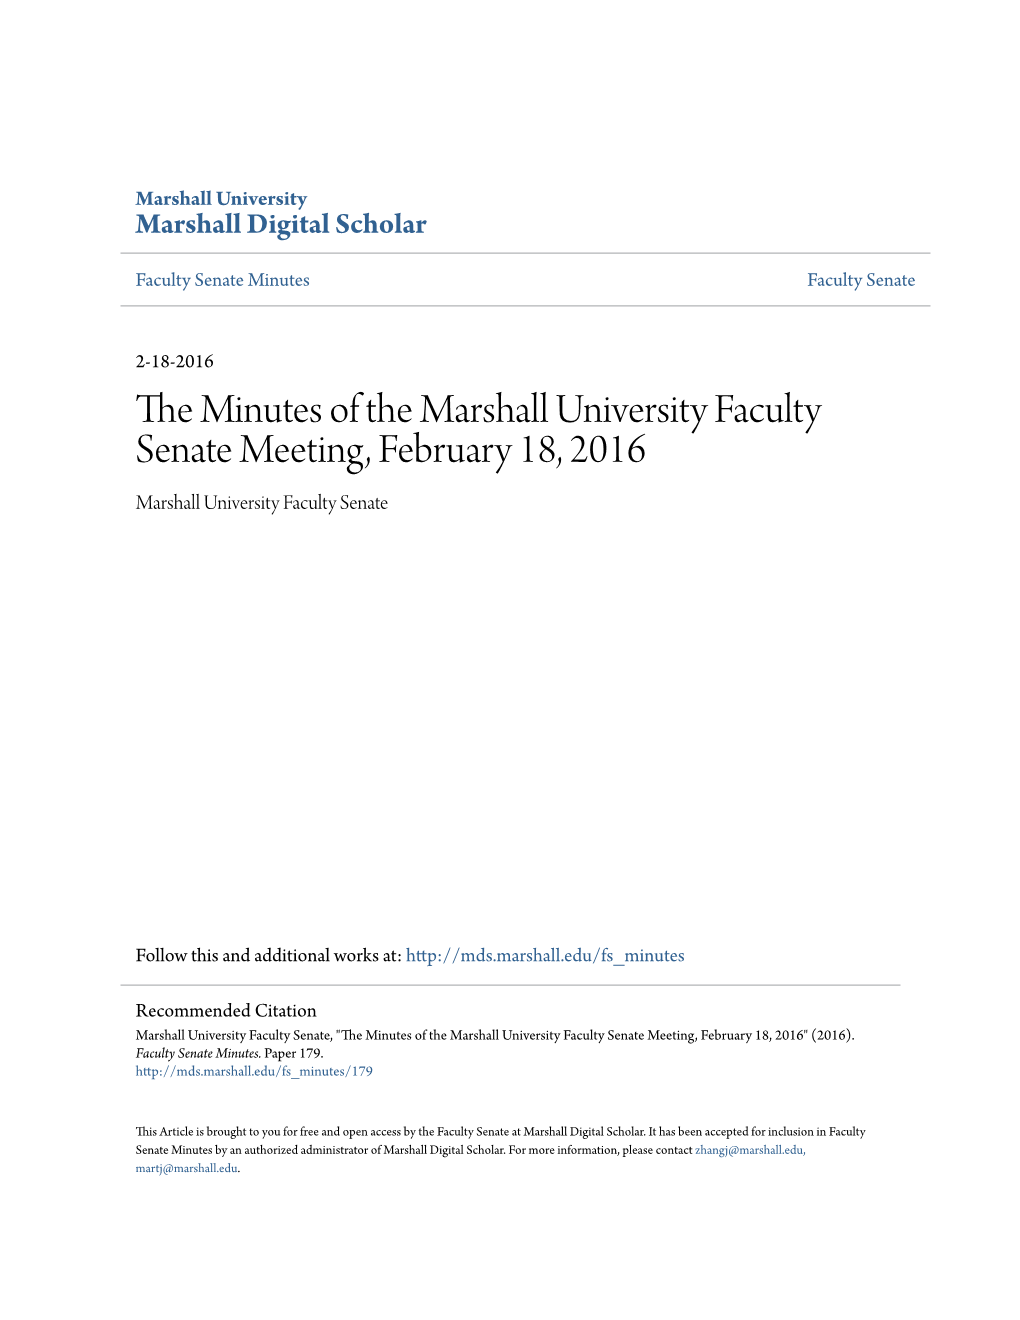 The Minutes of the Marshall University Faculty Senate Meeting, February